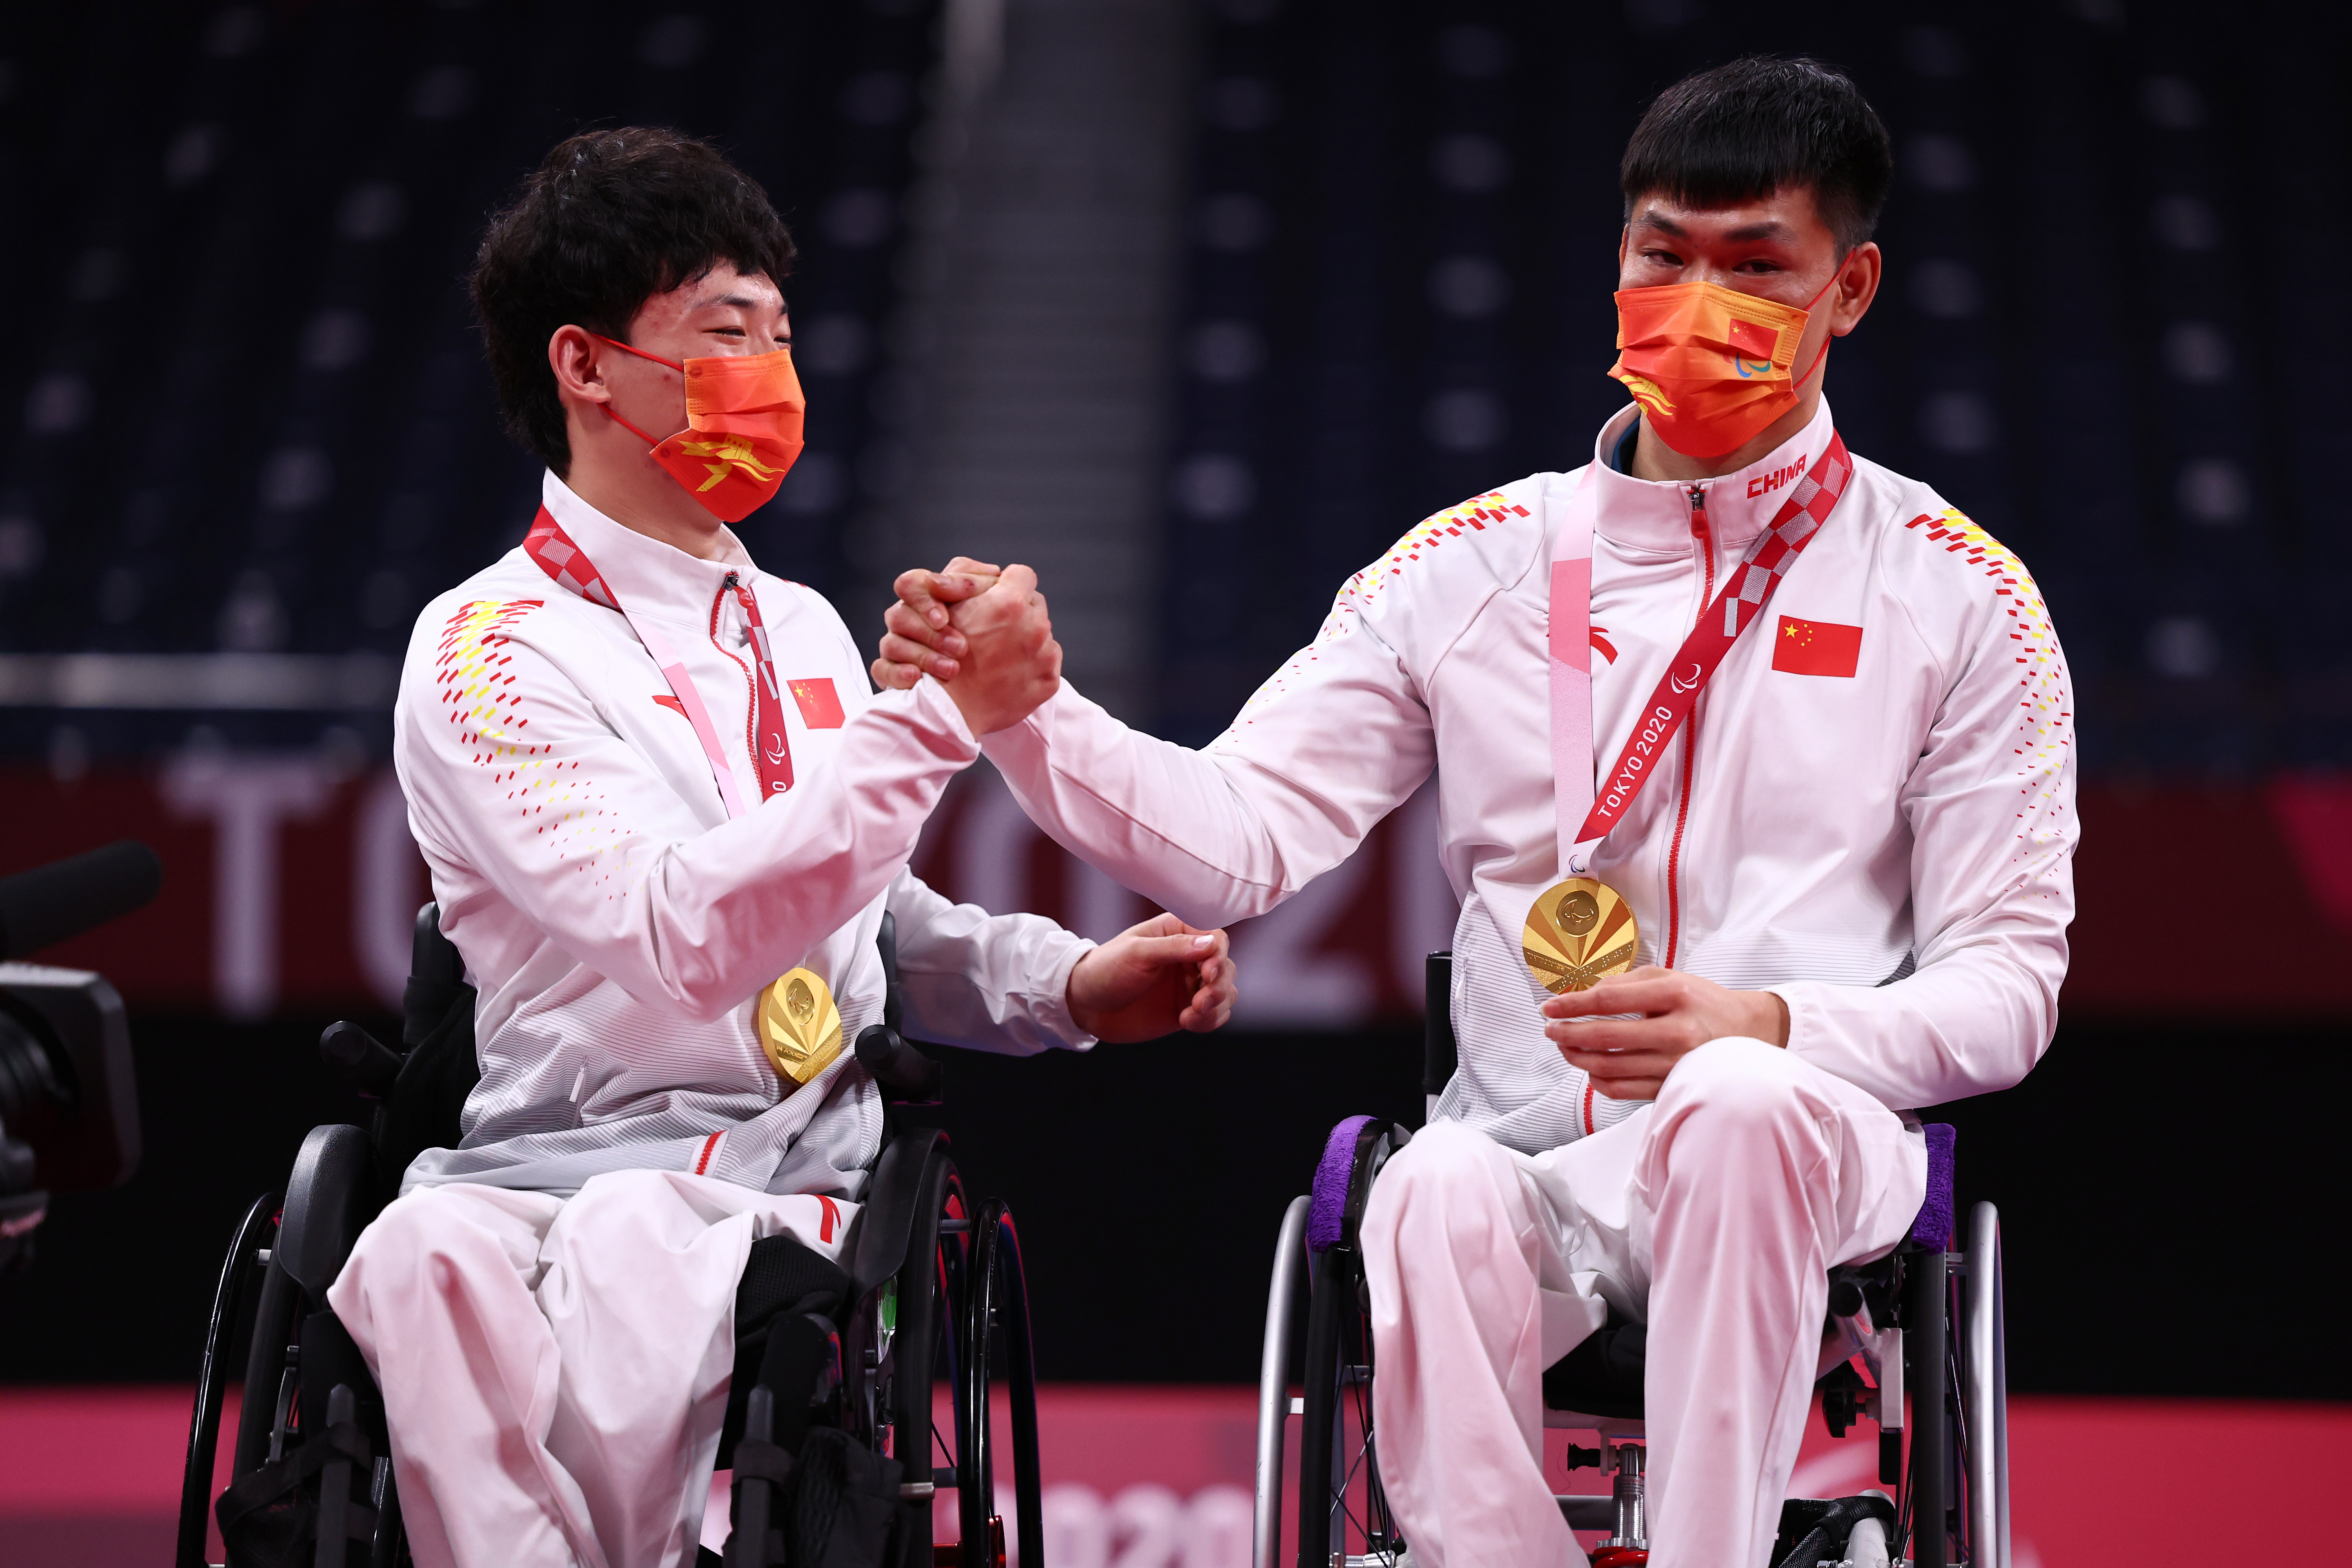 Tokyo 2020 Paralympic Games - Badminton - Men's Doubles WH Medal Ceremony - Yoyogi National Stadium, Tokyo, Japan - September 5, 2021. Gold medallists Zimo Qu of China and Jianpeng Mai of China celebrate on the podium REUTERS/Athit Perawongmetha